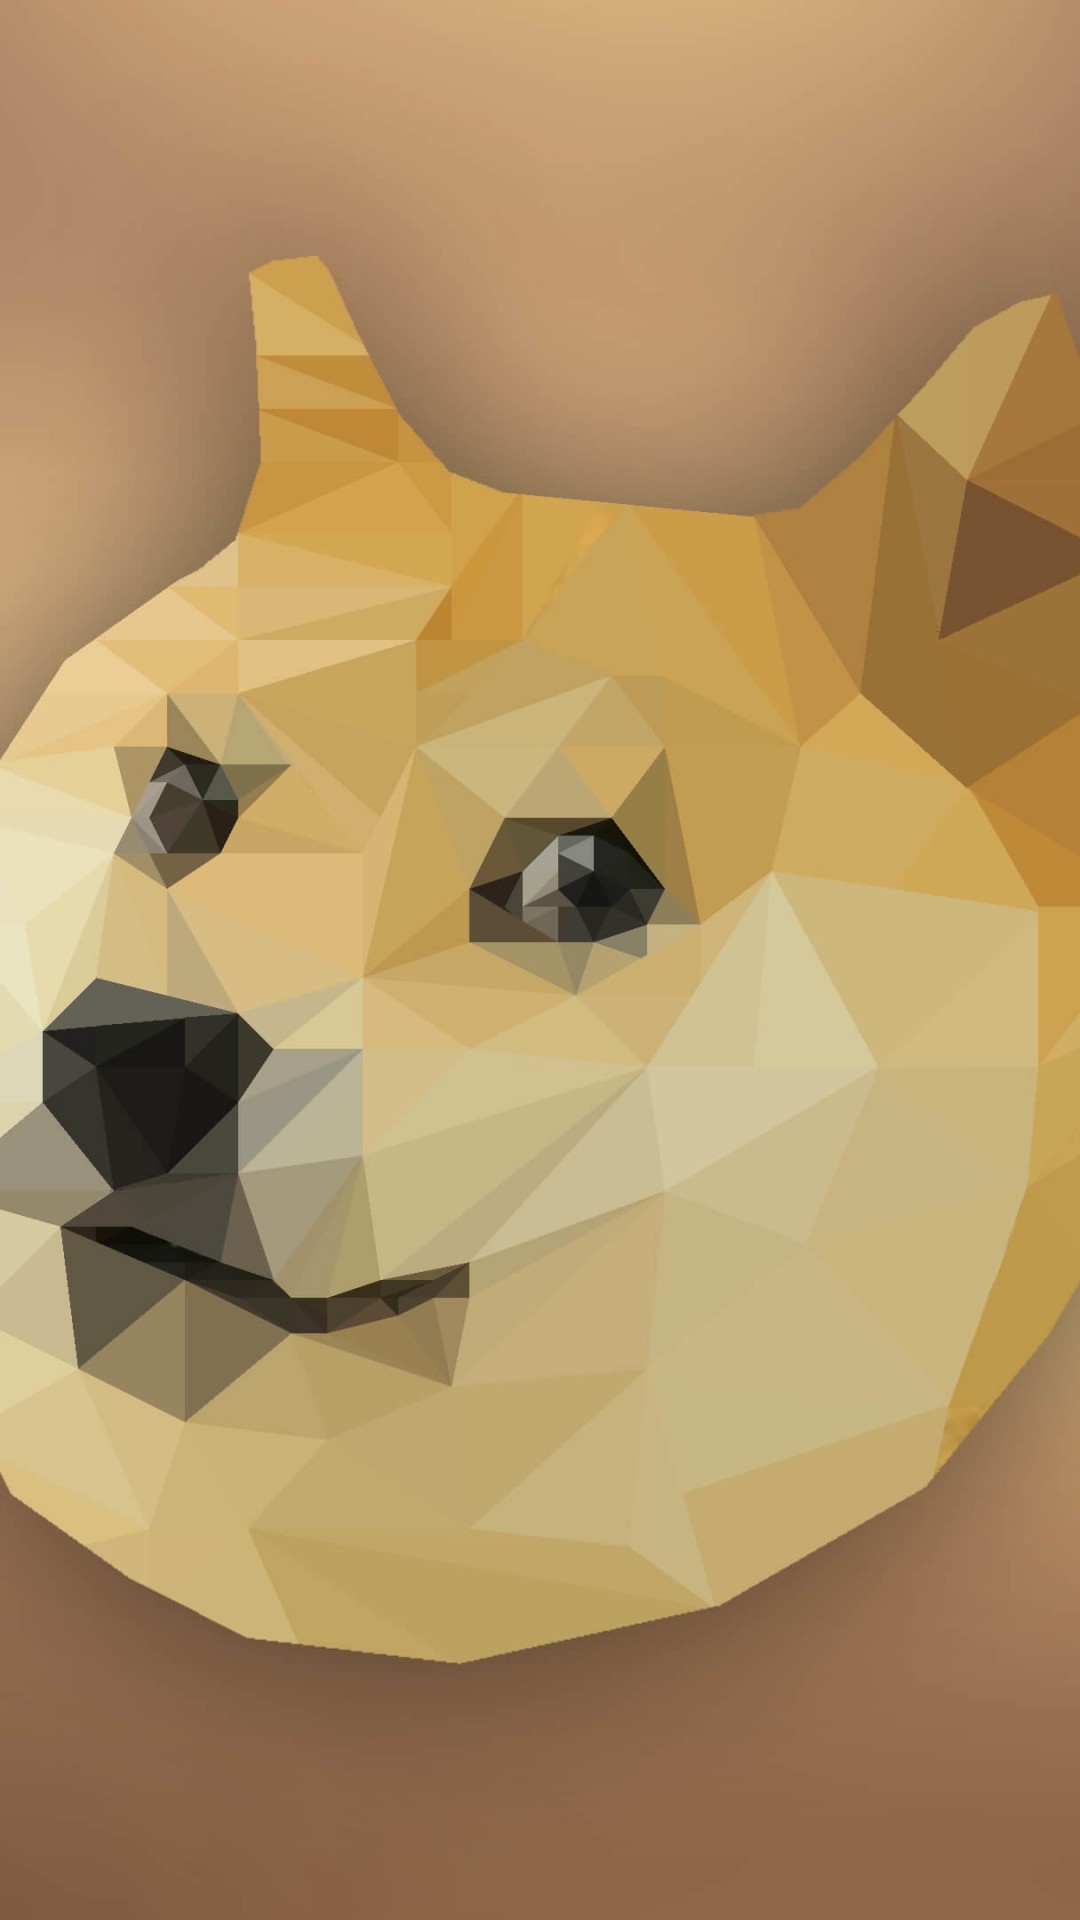 Low Poly Doge Wallpaper for SONY Xperia Z1